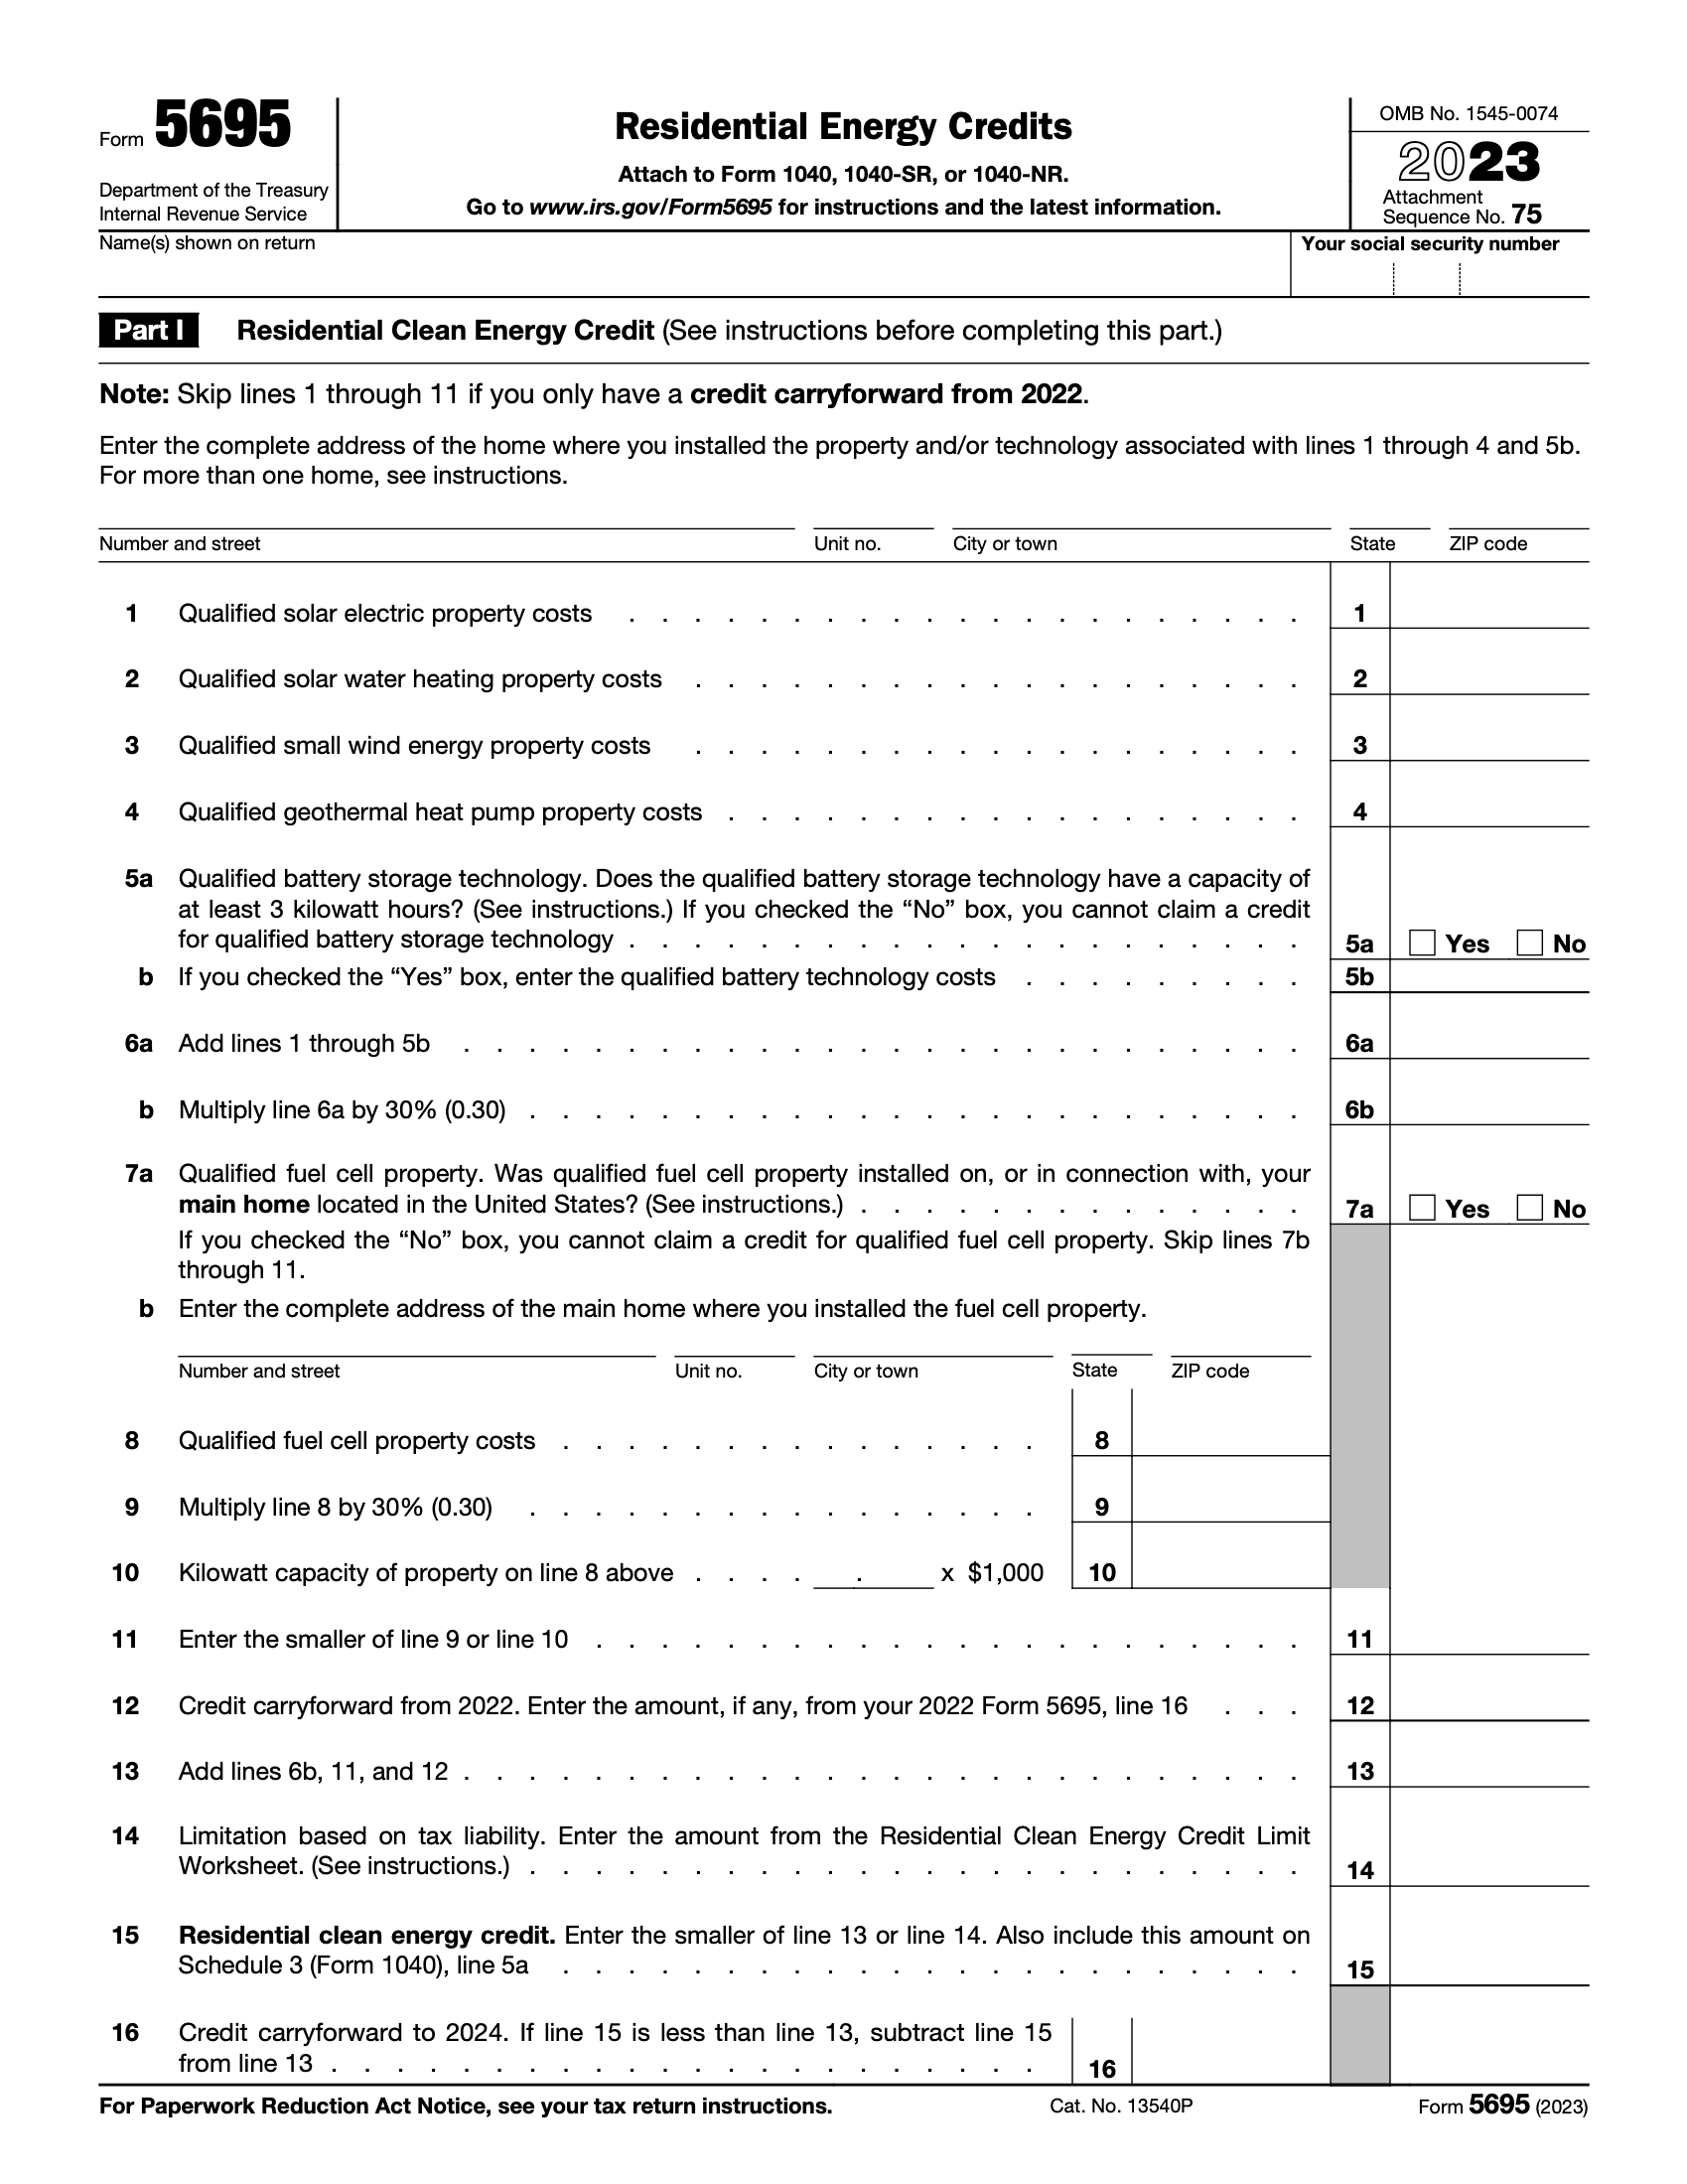 2024-2023-IRS-FORM-5695-RESIDENTIAL-ENERGY-CREDIT.png